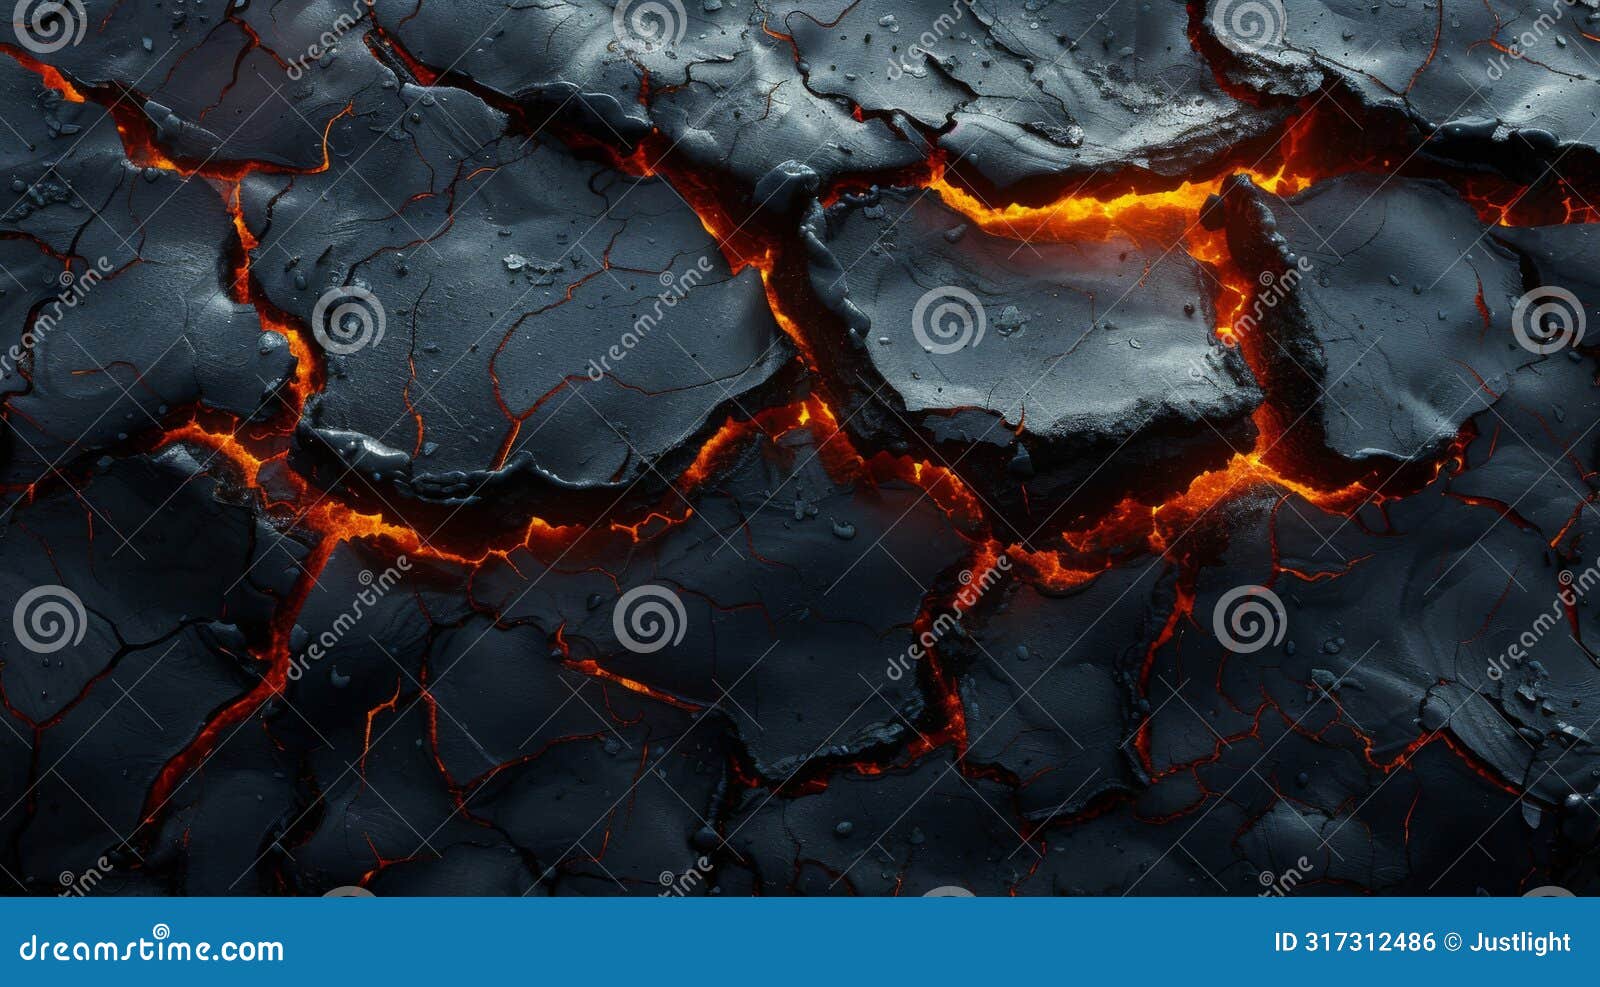 closeup of hardened lava with intricate cracks and crevices showcasing the intense heat it once possessed